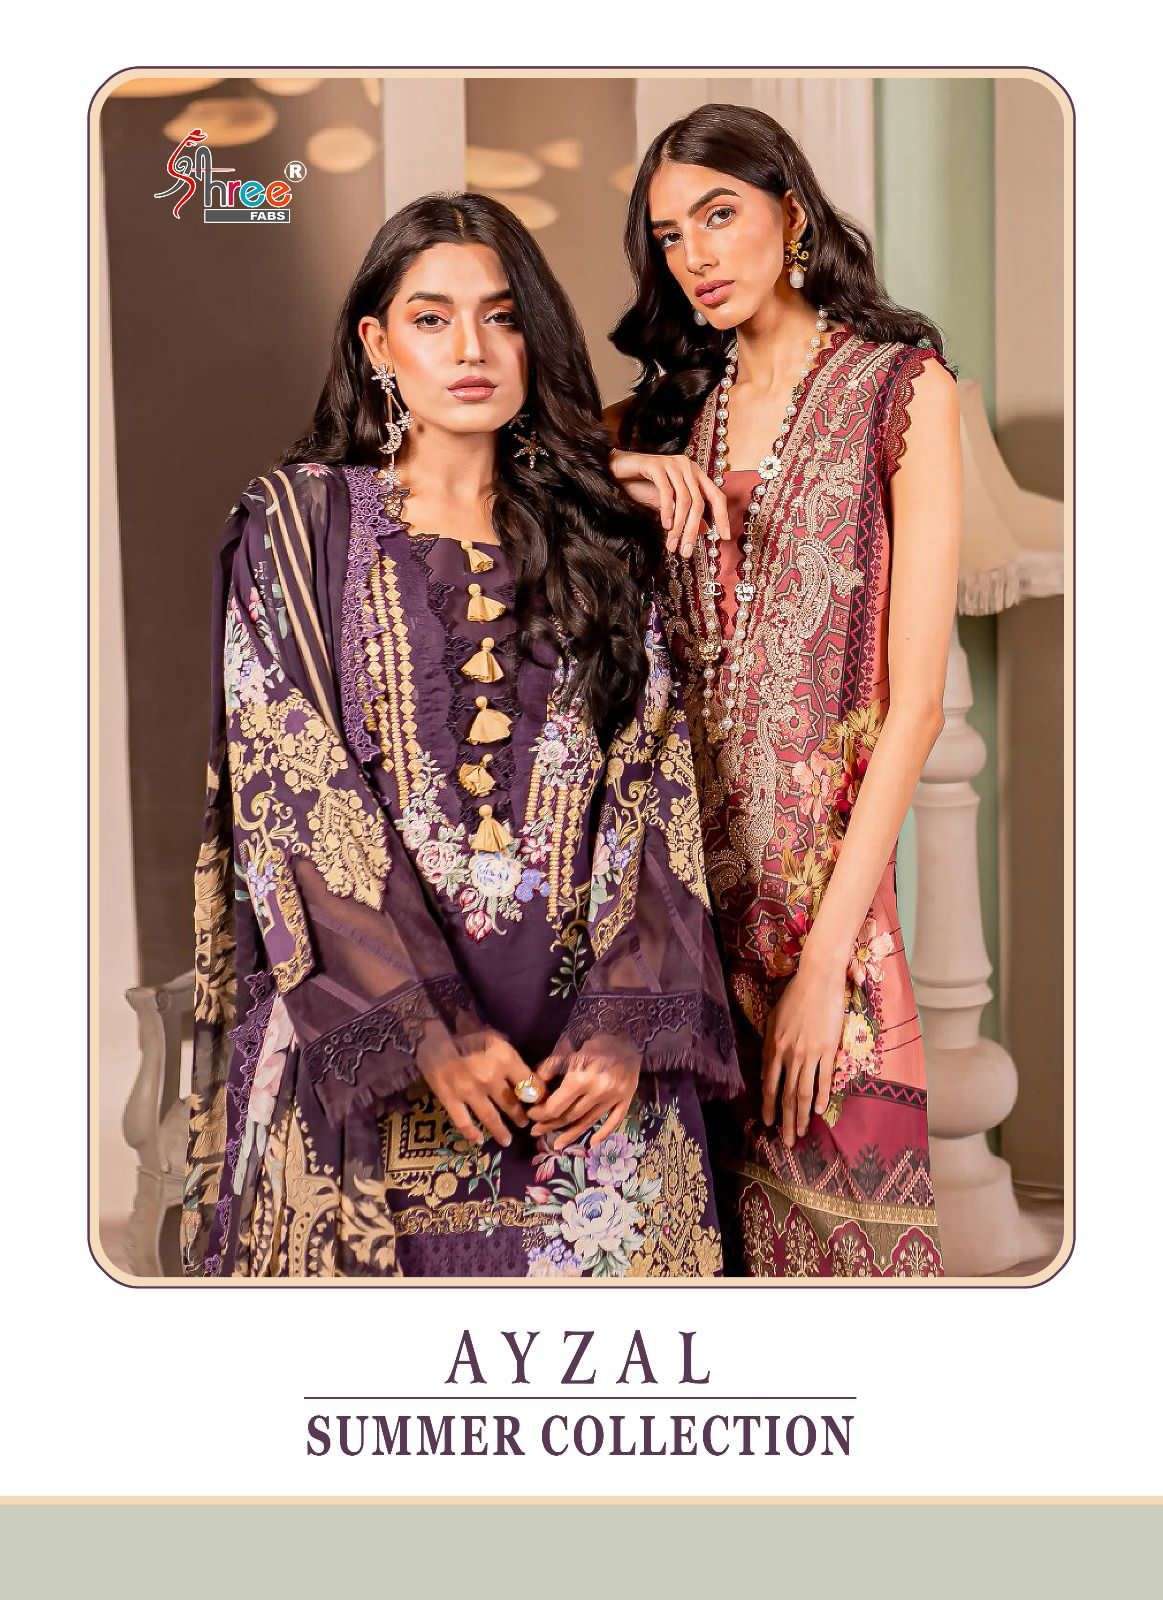 shree fabs ayzal summer collection series 3146-3151 pure cotton suit